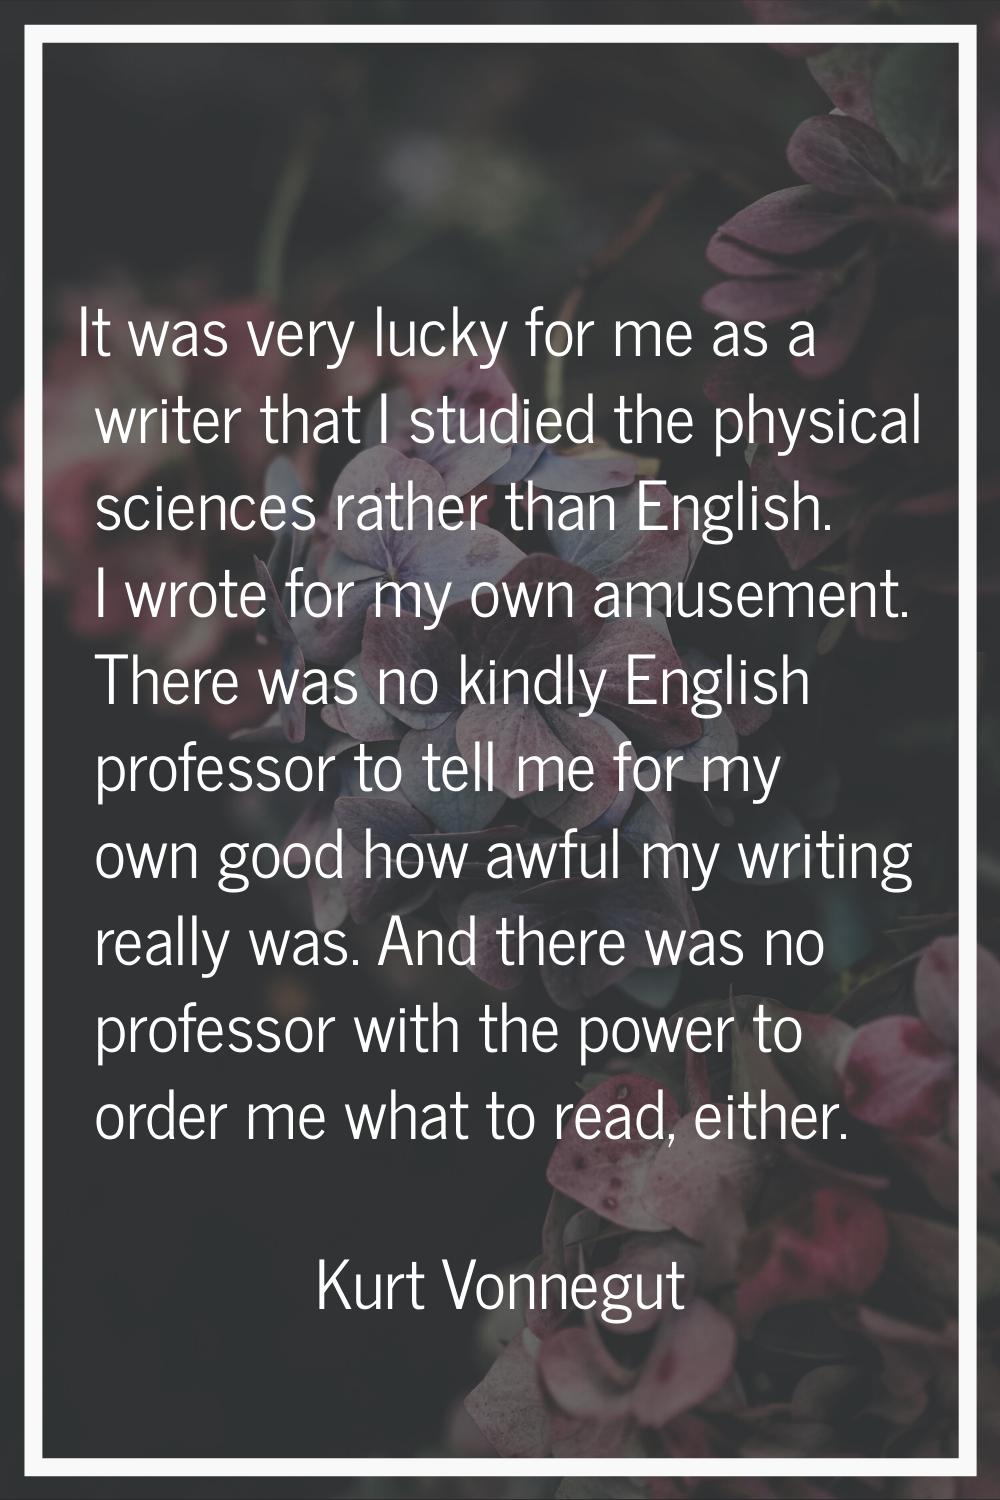 It was very lucky for me as a writer that I studied the physical sciences rather than English. I wr